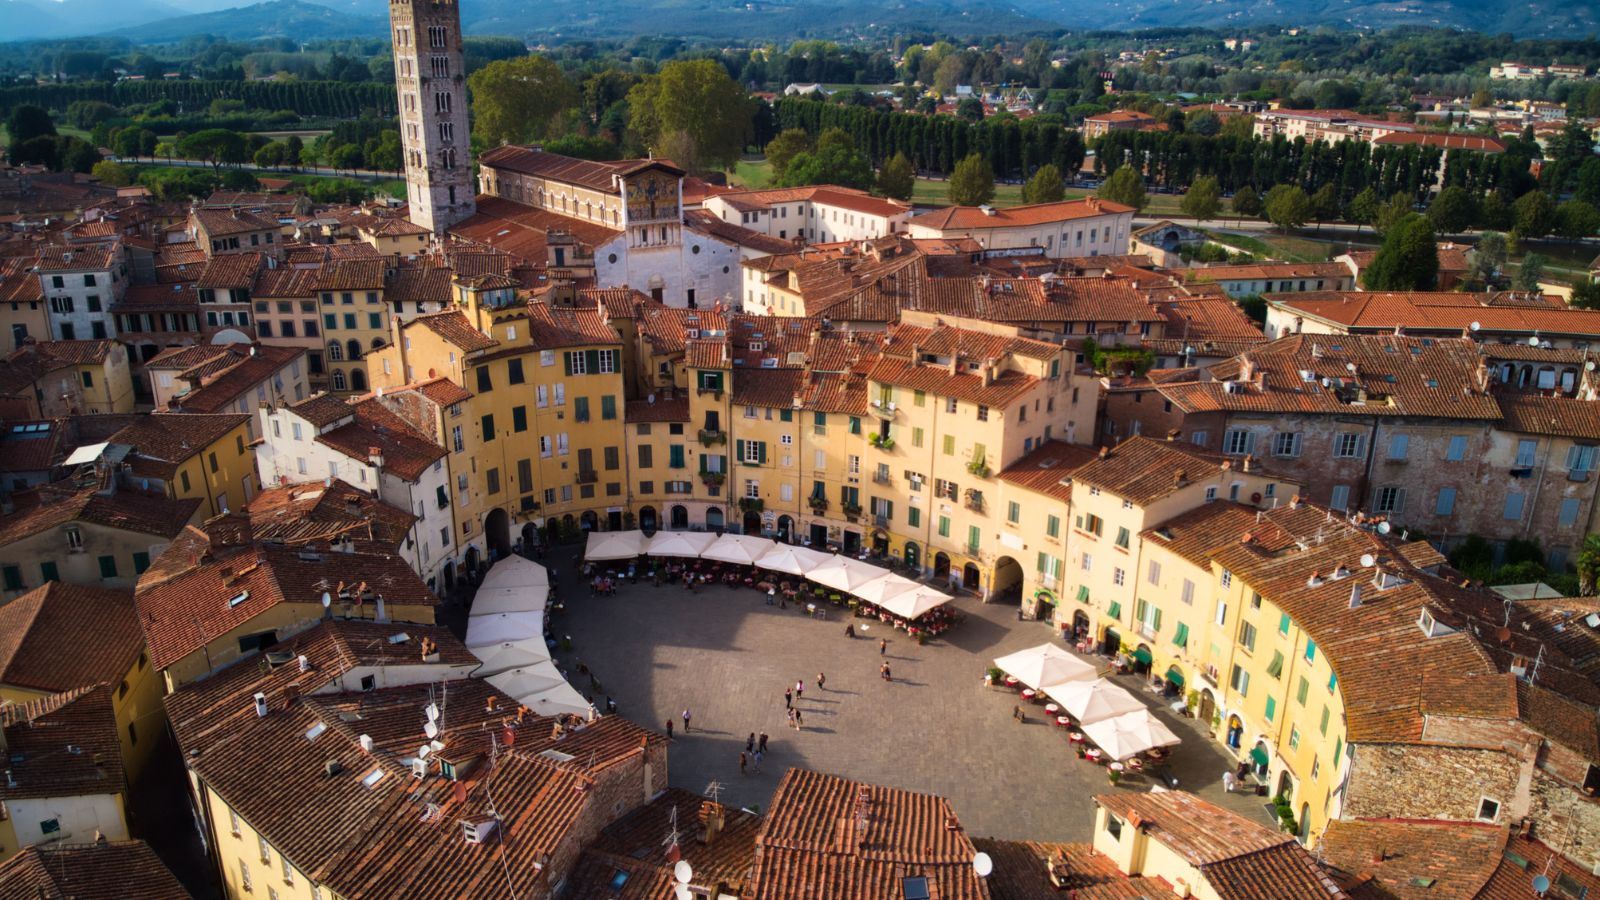 <p>If you head to Lucca, you can visit the well-preserved Renaissance walls and enjoy walking or cycling to the top of them. Lucca also has many historic churches and palaces for you to discover in the city center. If you vacation in Lucca at the right time, you’ll be able to attend one of their cultural festivals. </p>